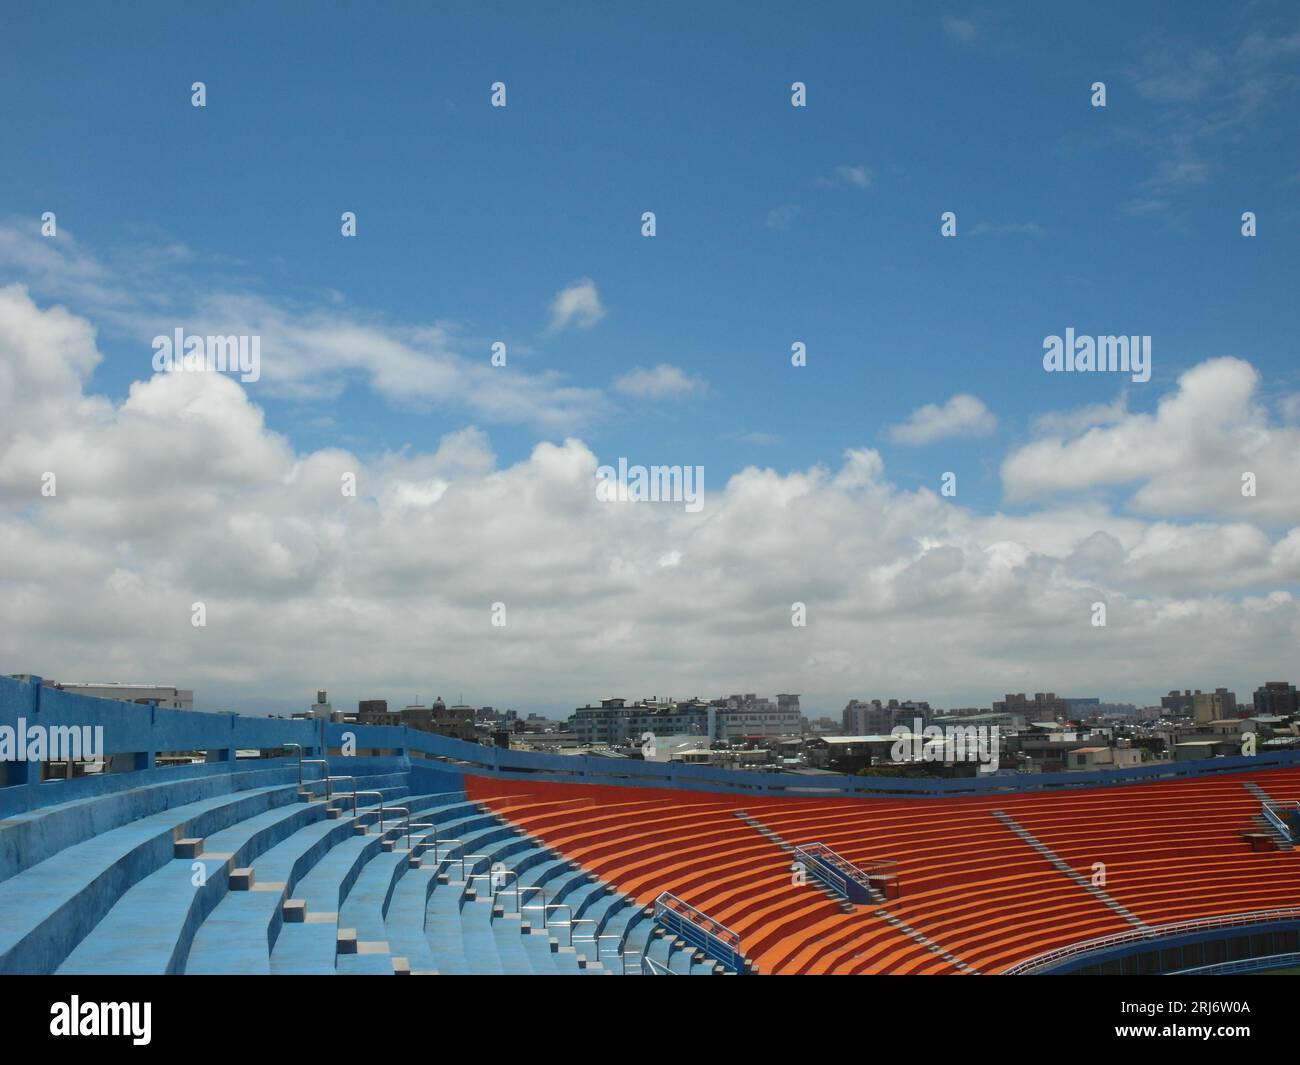 An aerial view of an indoor baseball stadium featuring a blue sky background Stock Photo